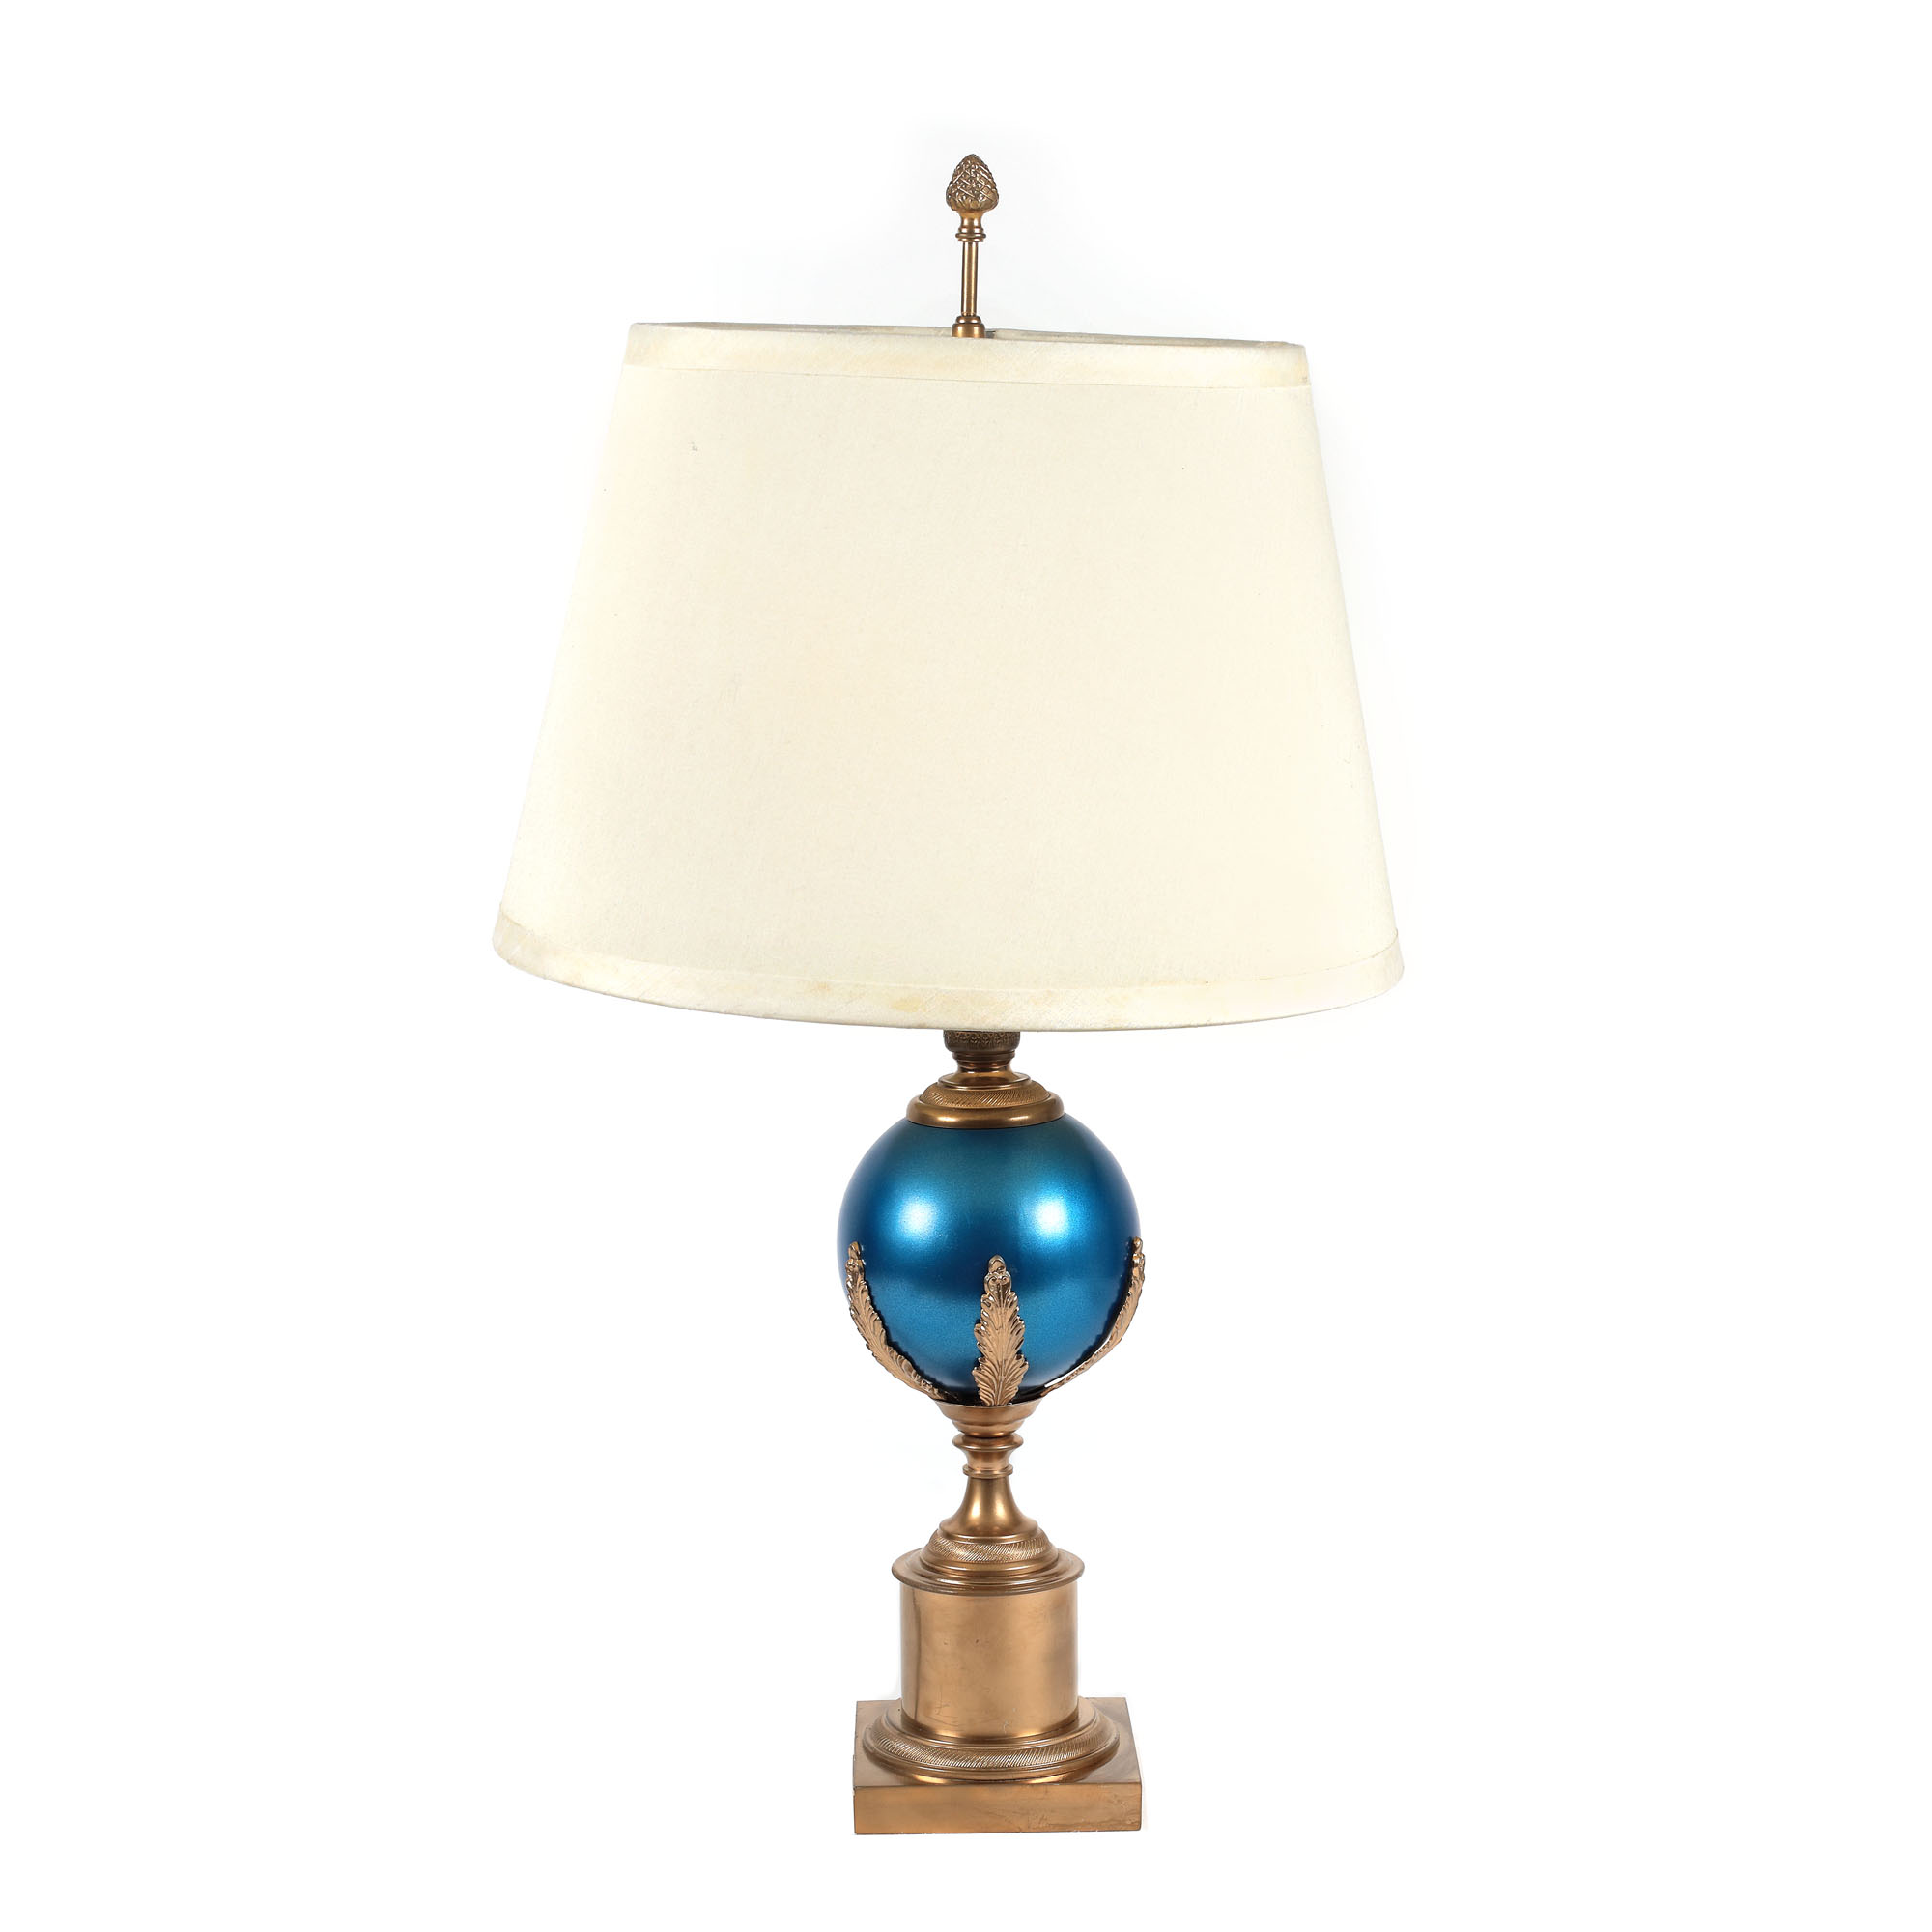 French workshop, Table lamp made by Maison Charles, gilded bronze, decorated with plant elements and